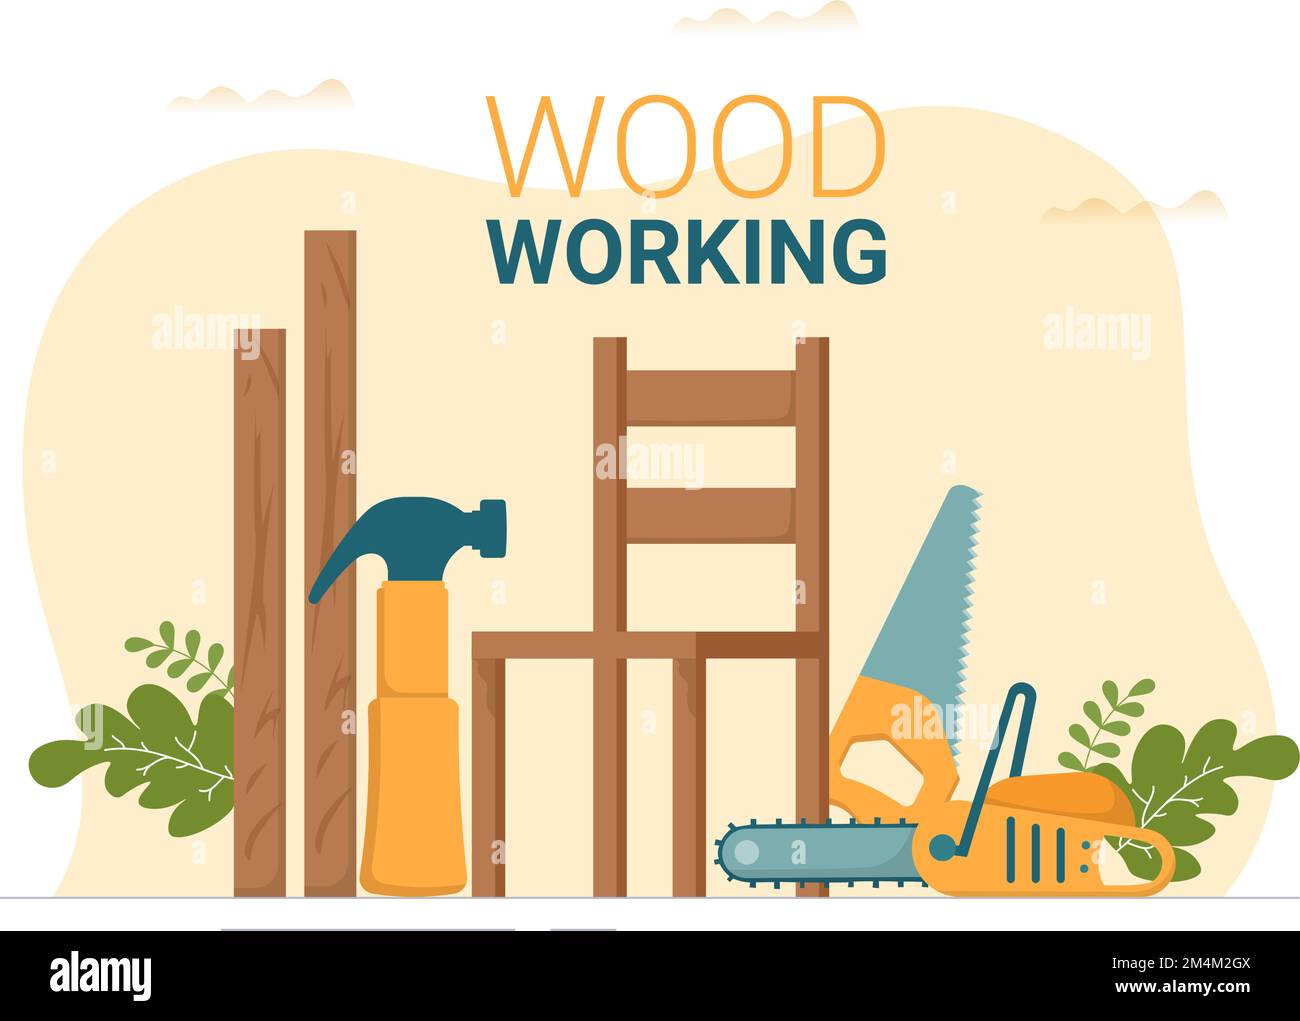 Woodworking with Wood Cutting by Modern Craftsman and Worker using Tools Set in Flat Cartoon Hand Drawn Template Illustration Stock Vector